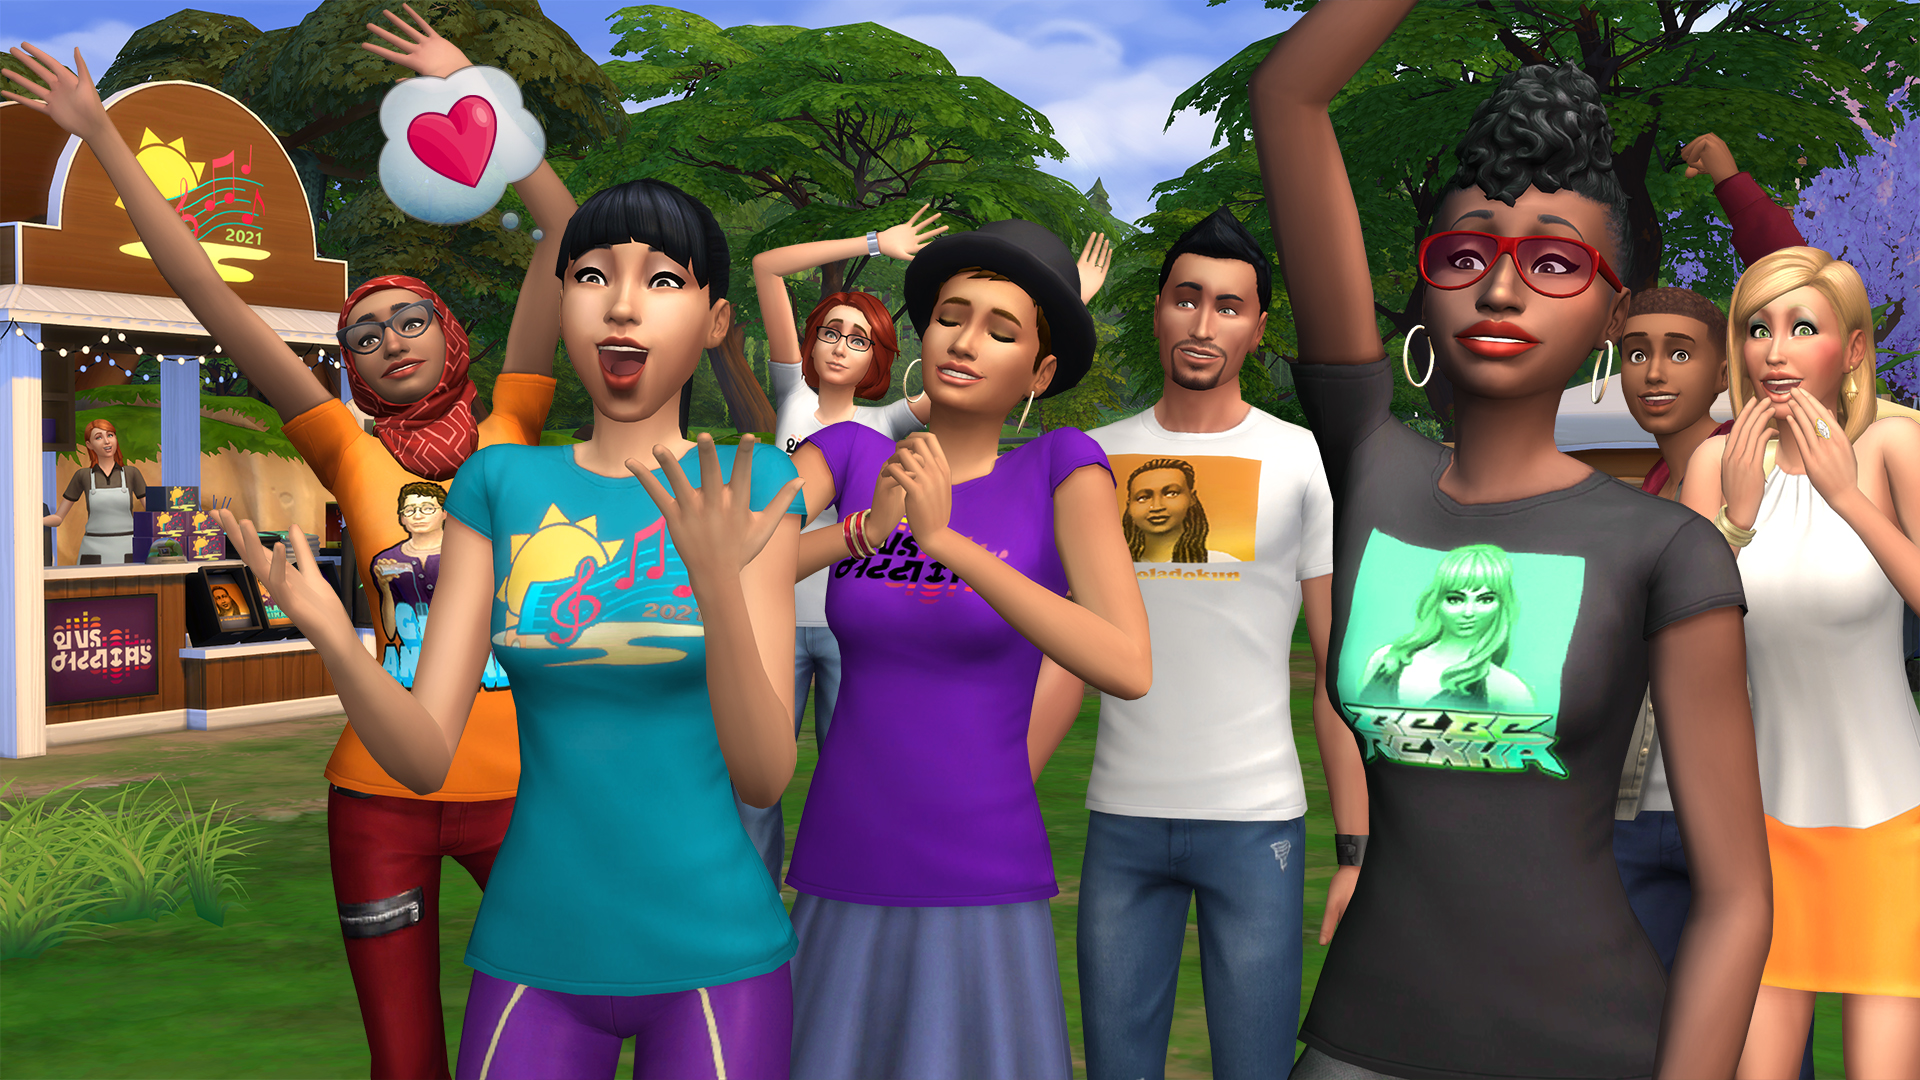  The Sims 4 is getting official mod support 